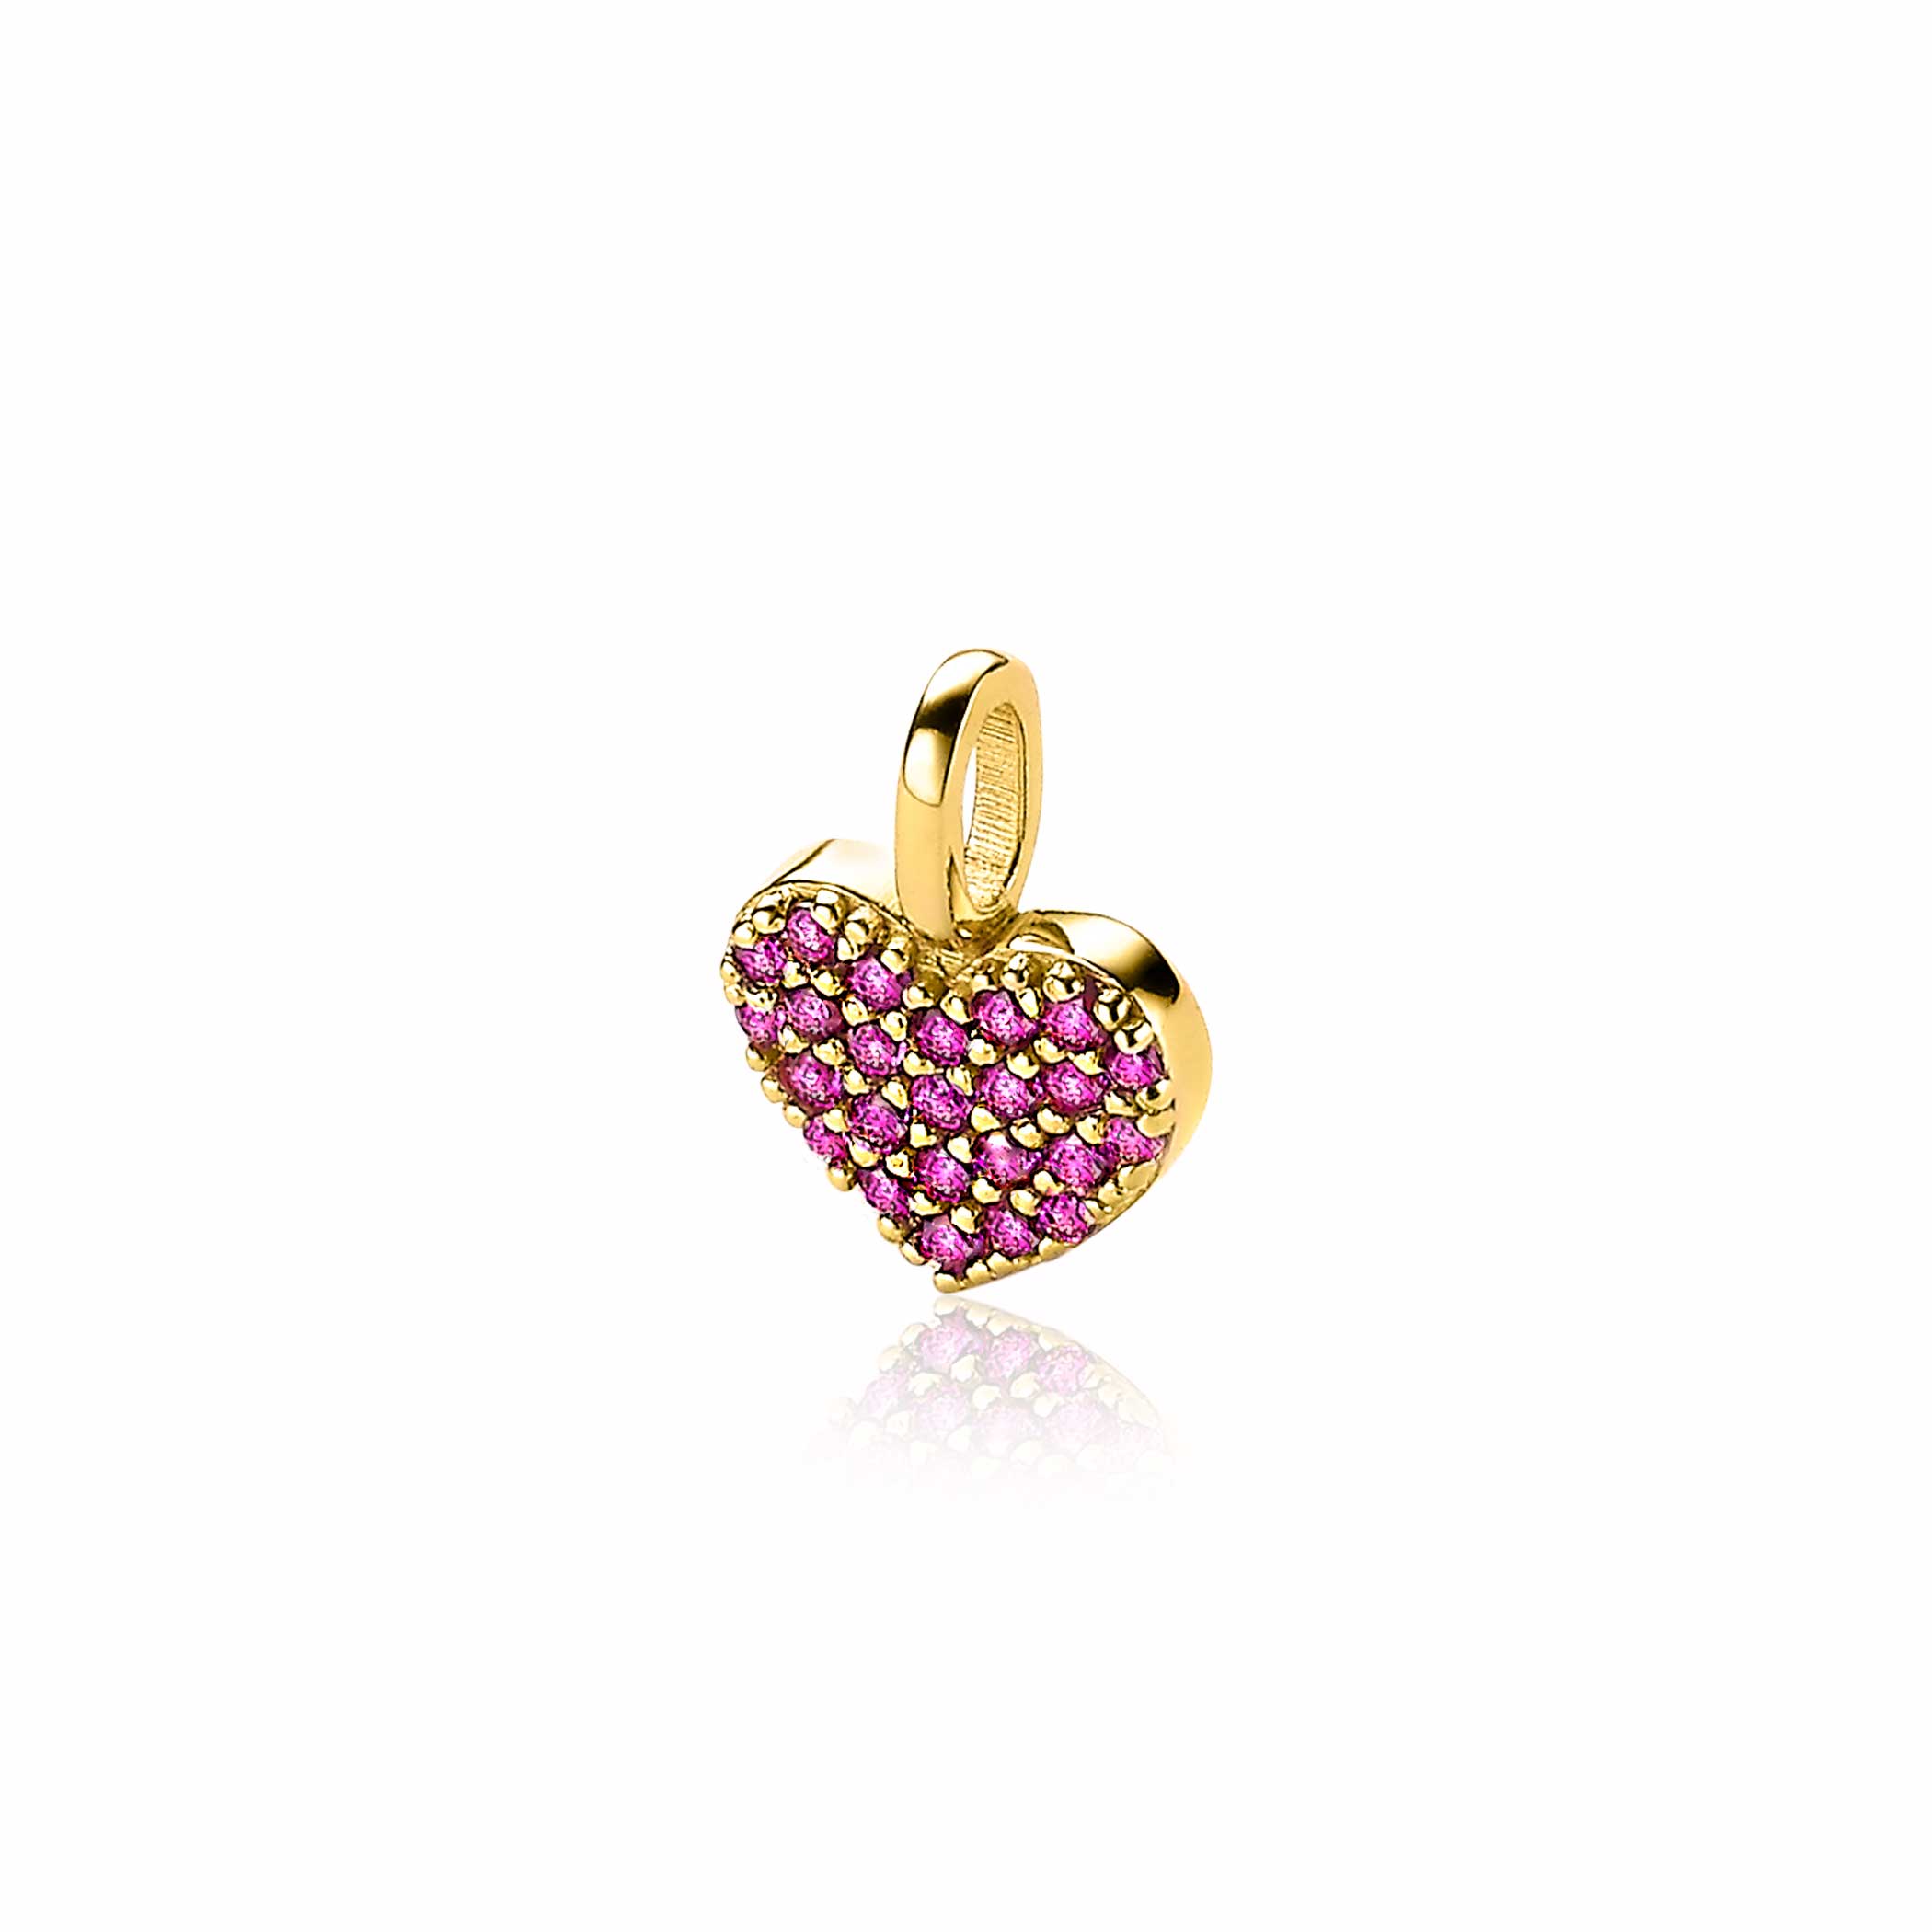 13mm ZINZI Gold Plated Sterling Silver Heart Pendant Dark Pink Zirconias ZIH2139R (excl. necklace)